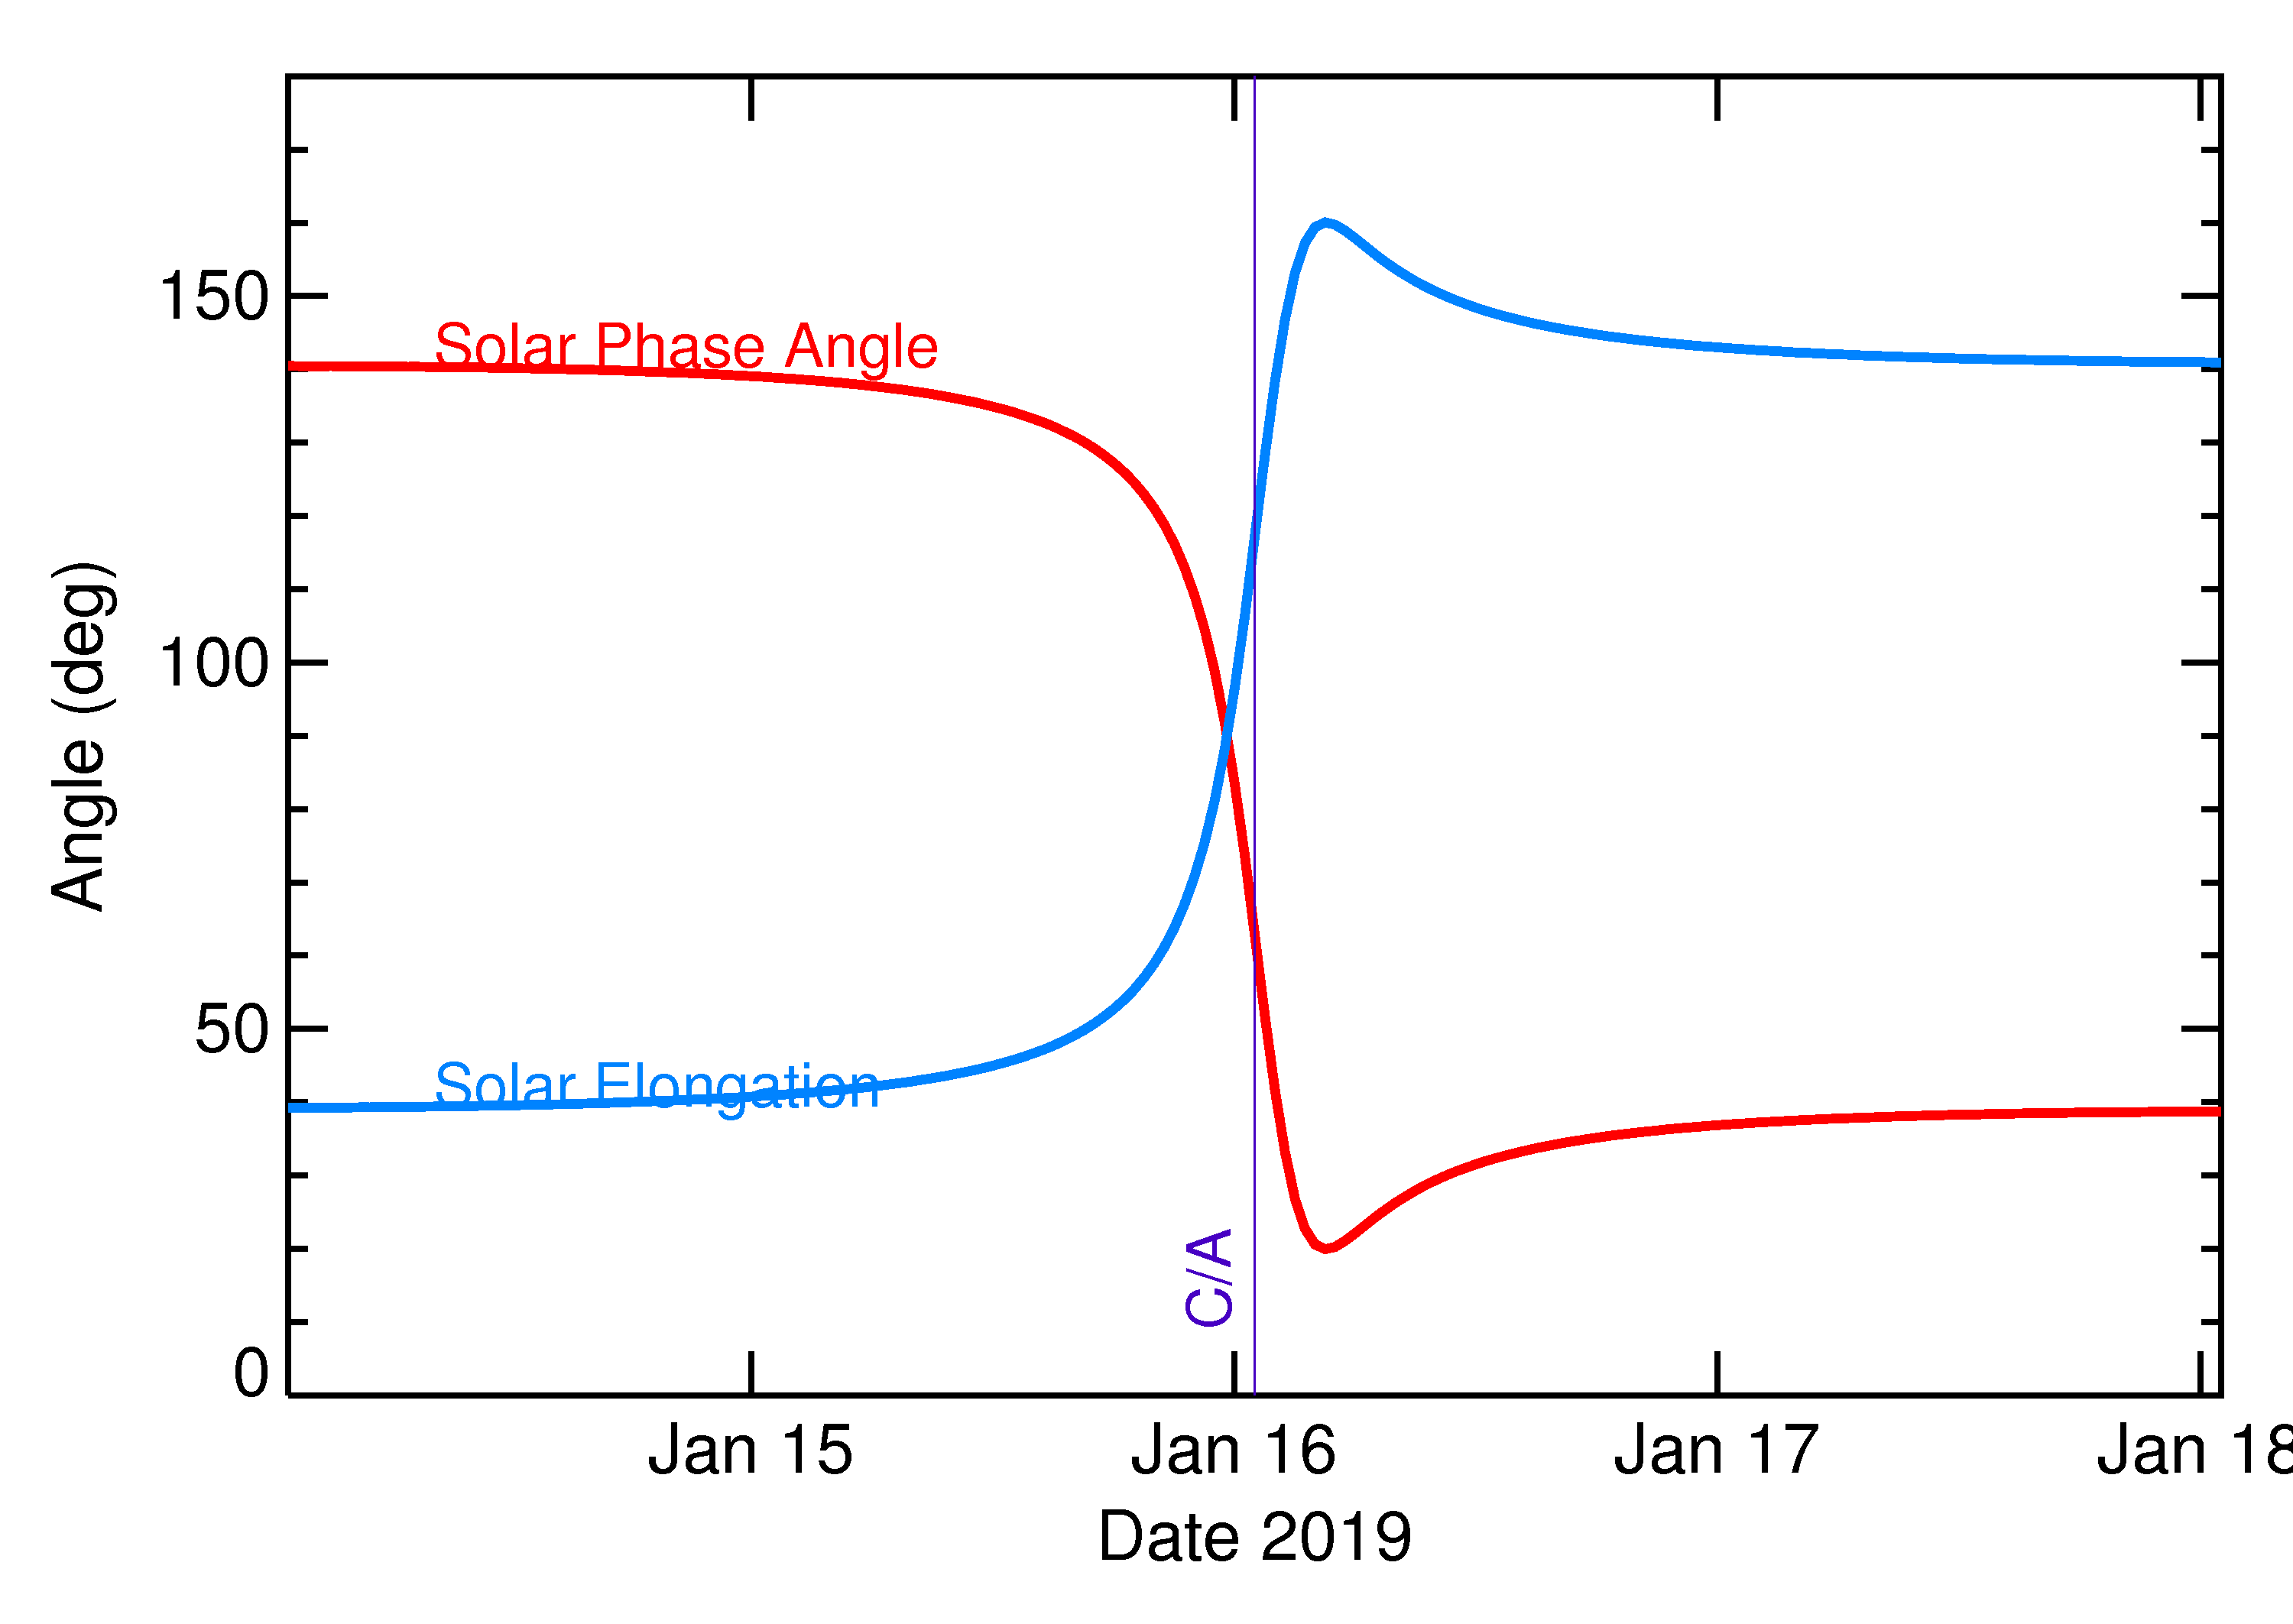 Solar Elongation and Solar Phase Angle of 2019 BO in the days around closest approach